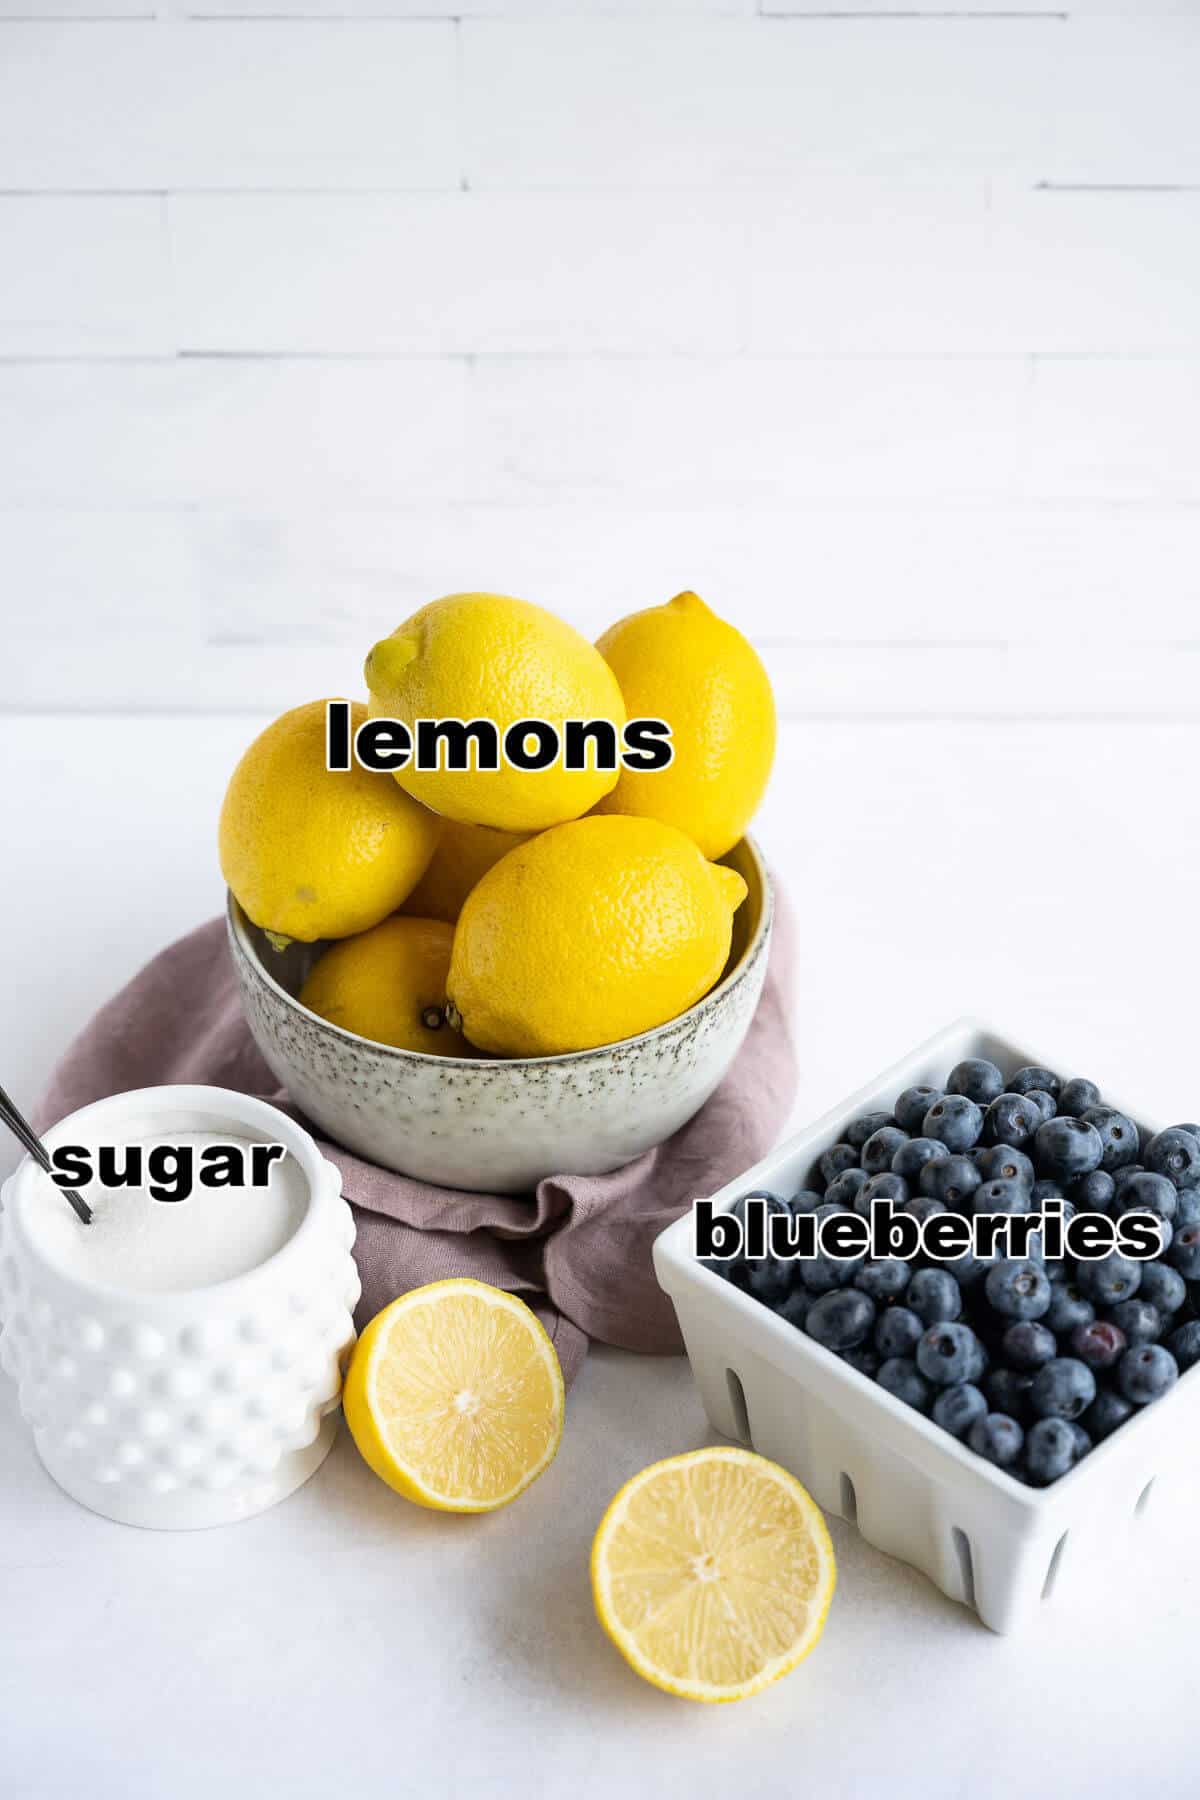 A bowl of Lemons, container of blueberries, and a jar of sugar.